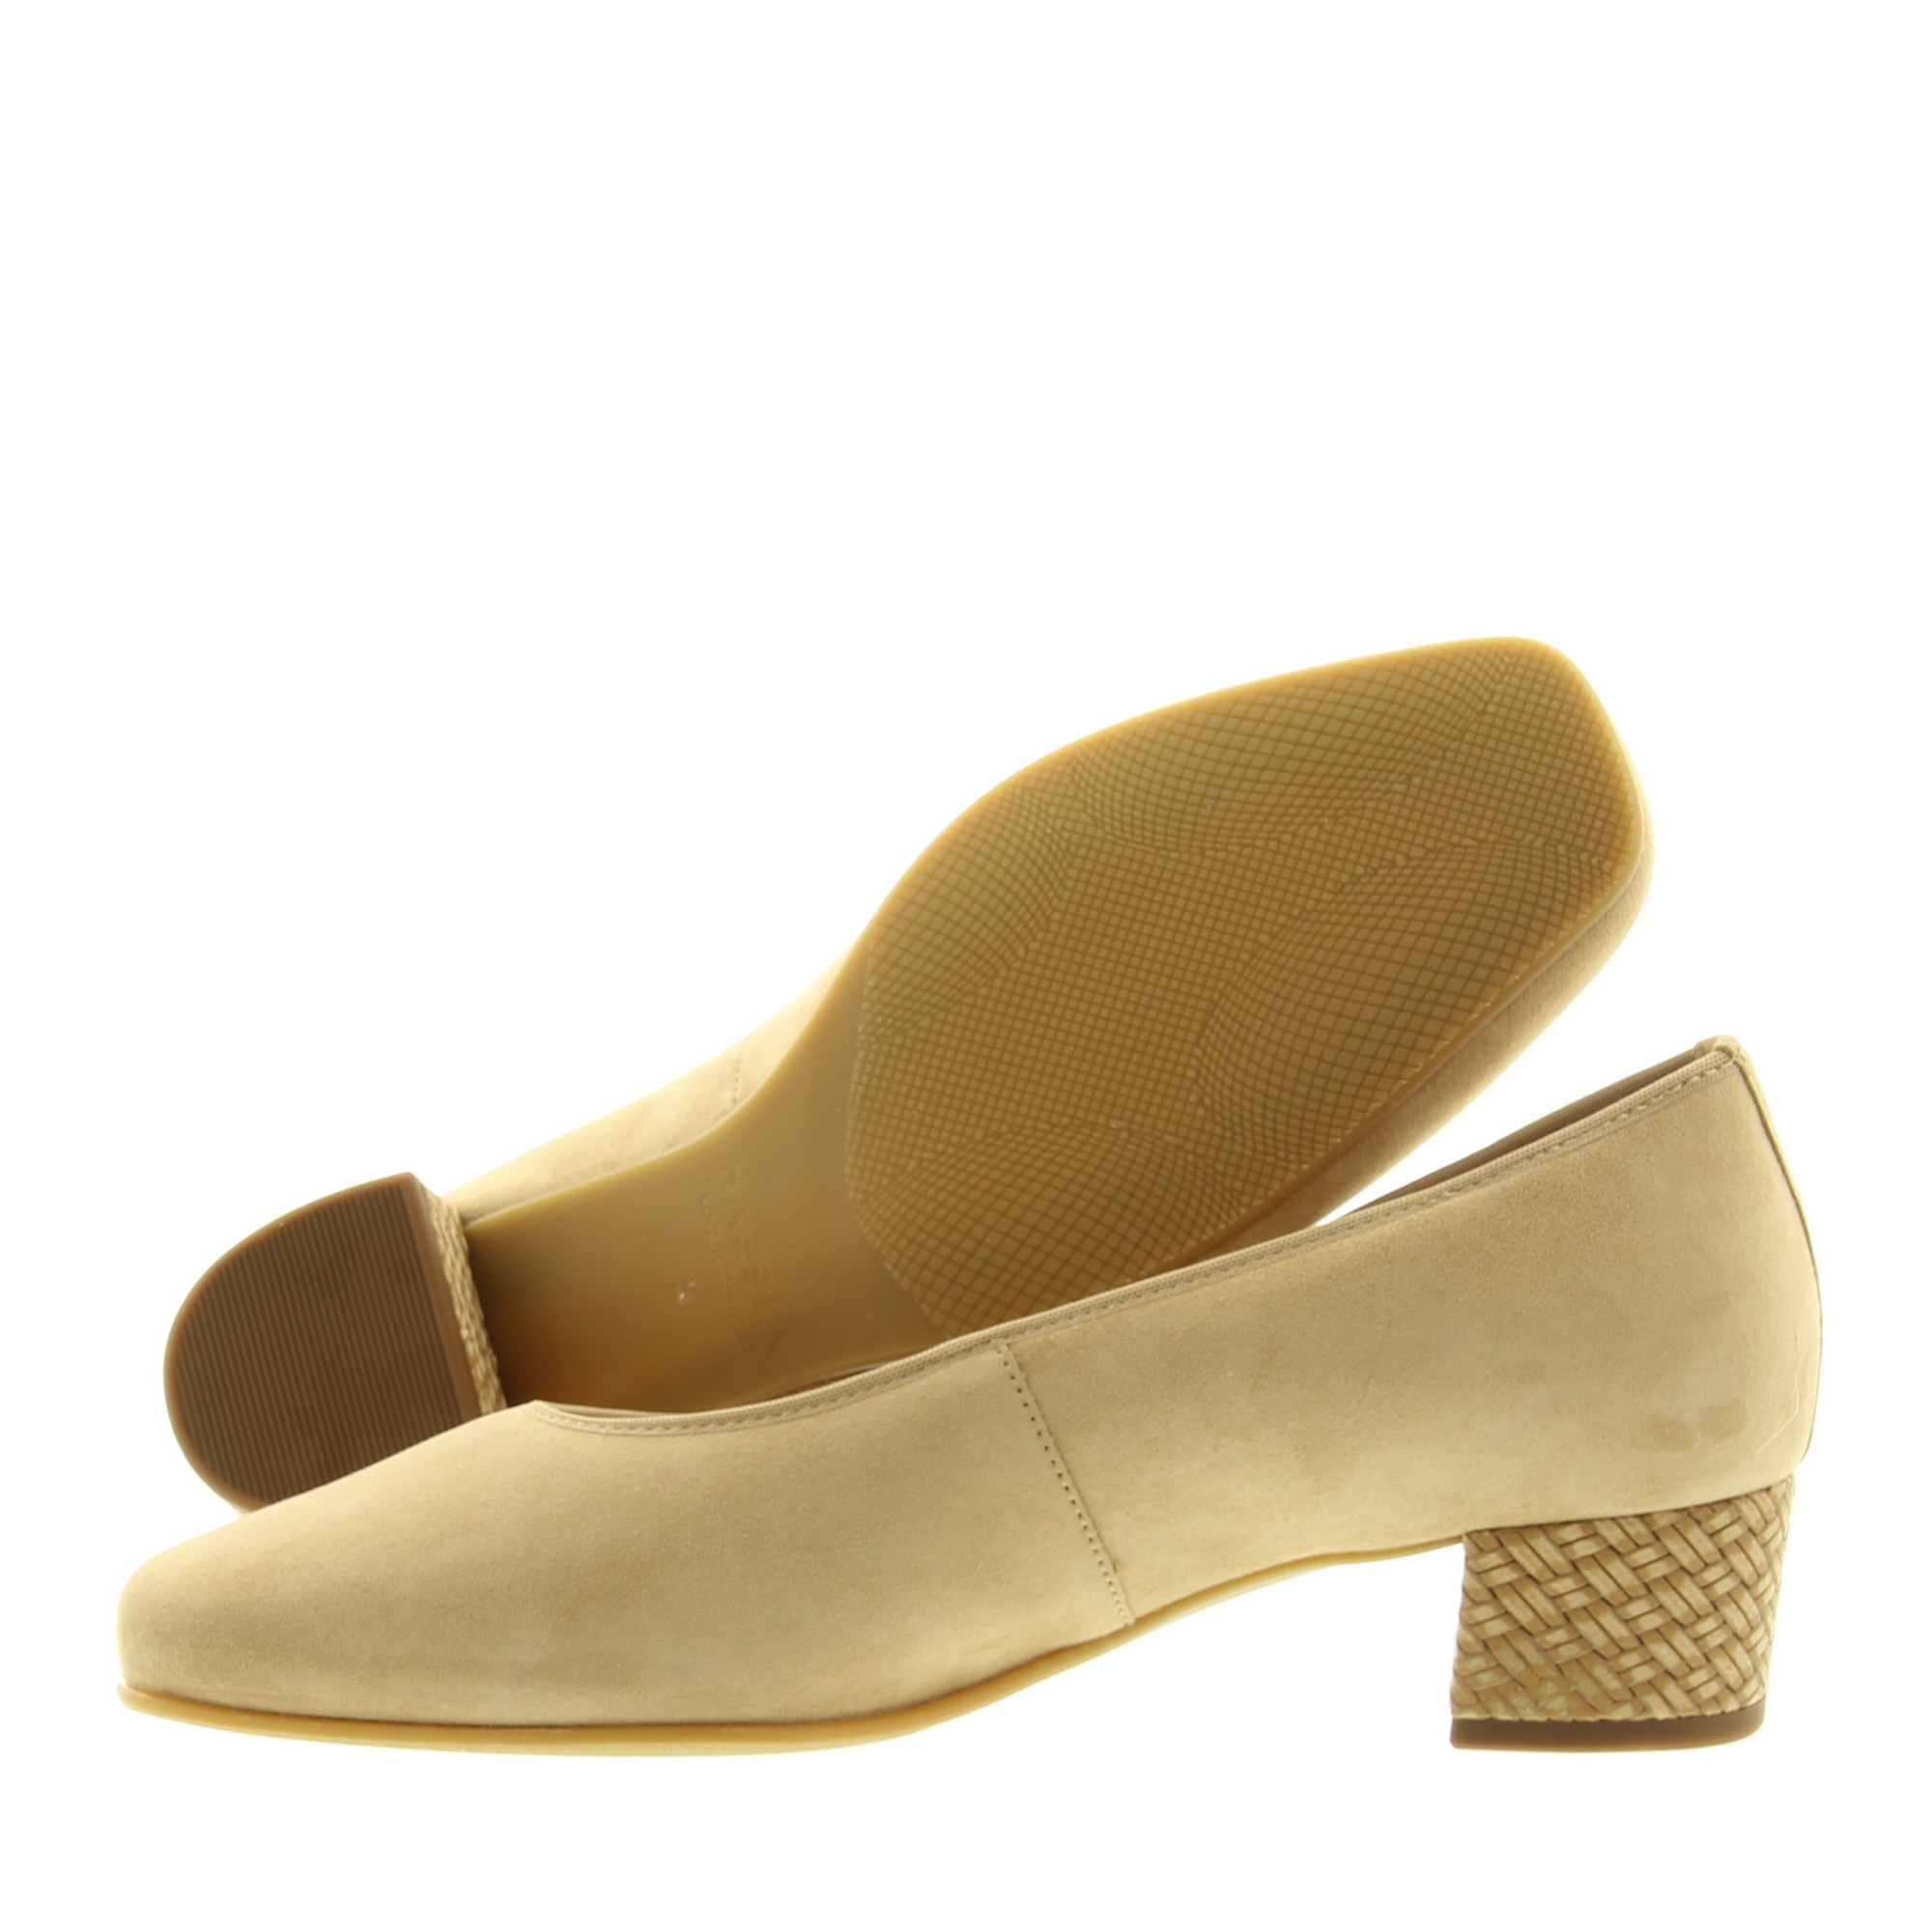 Hassia Shoes 303302 Evelyn 1200 Creme